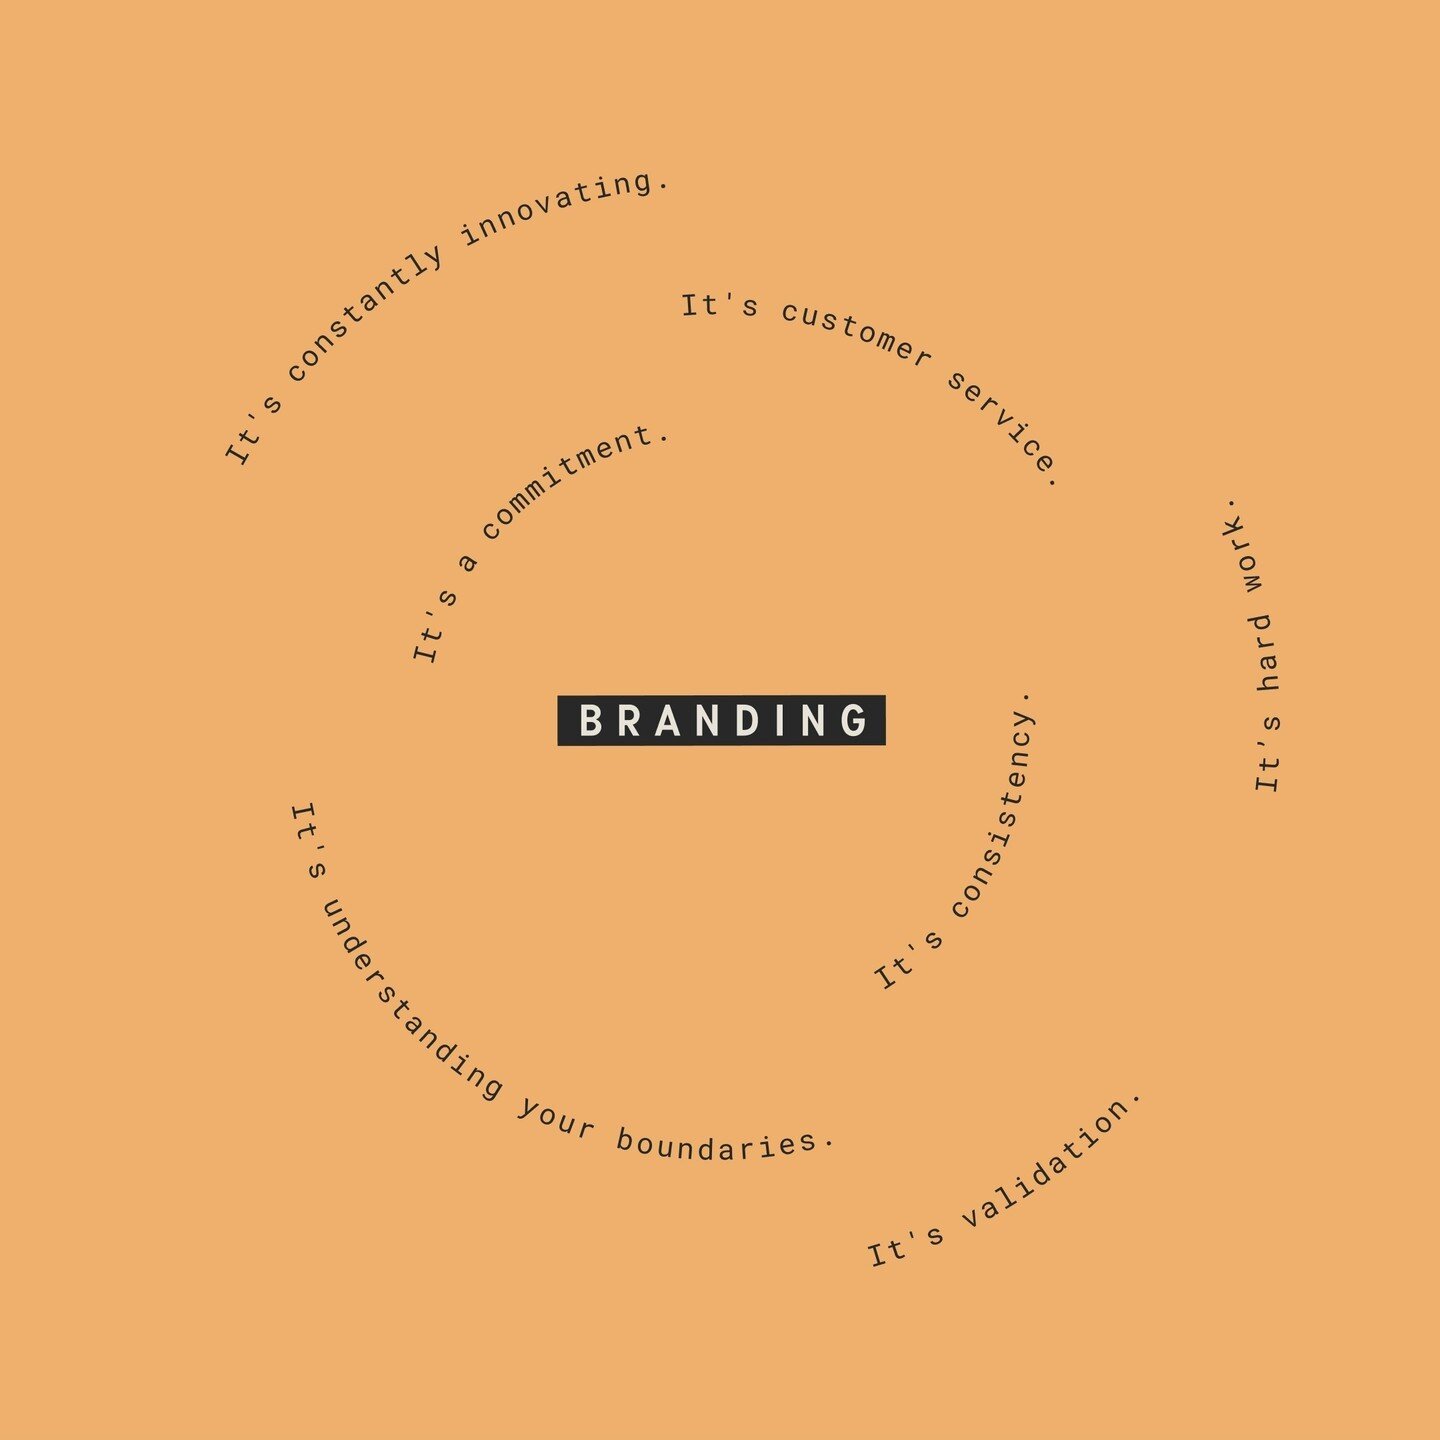 Branding isn't a project. It's not one + done. ⁠
⁠
It's a commitment. ⁠
It's consistency.⁠
It's understanding your boundaries.⁠
It's customer service.⁠
It's validation.⁠
It's constantly innovating. ⁠
⁠
If you are ready to have a brand like nobody's b